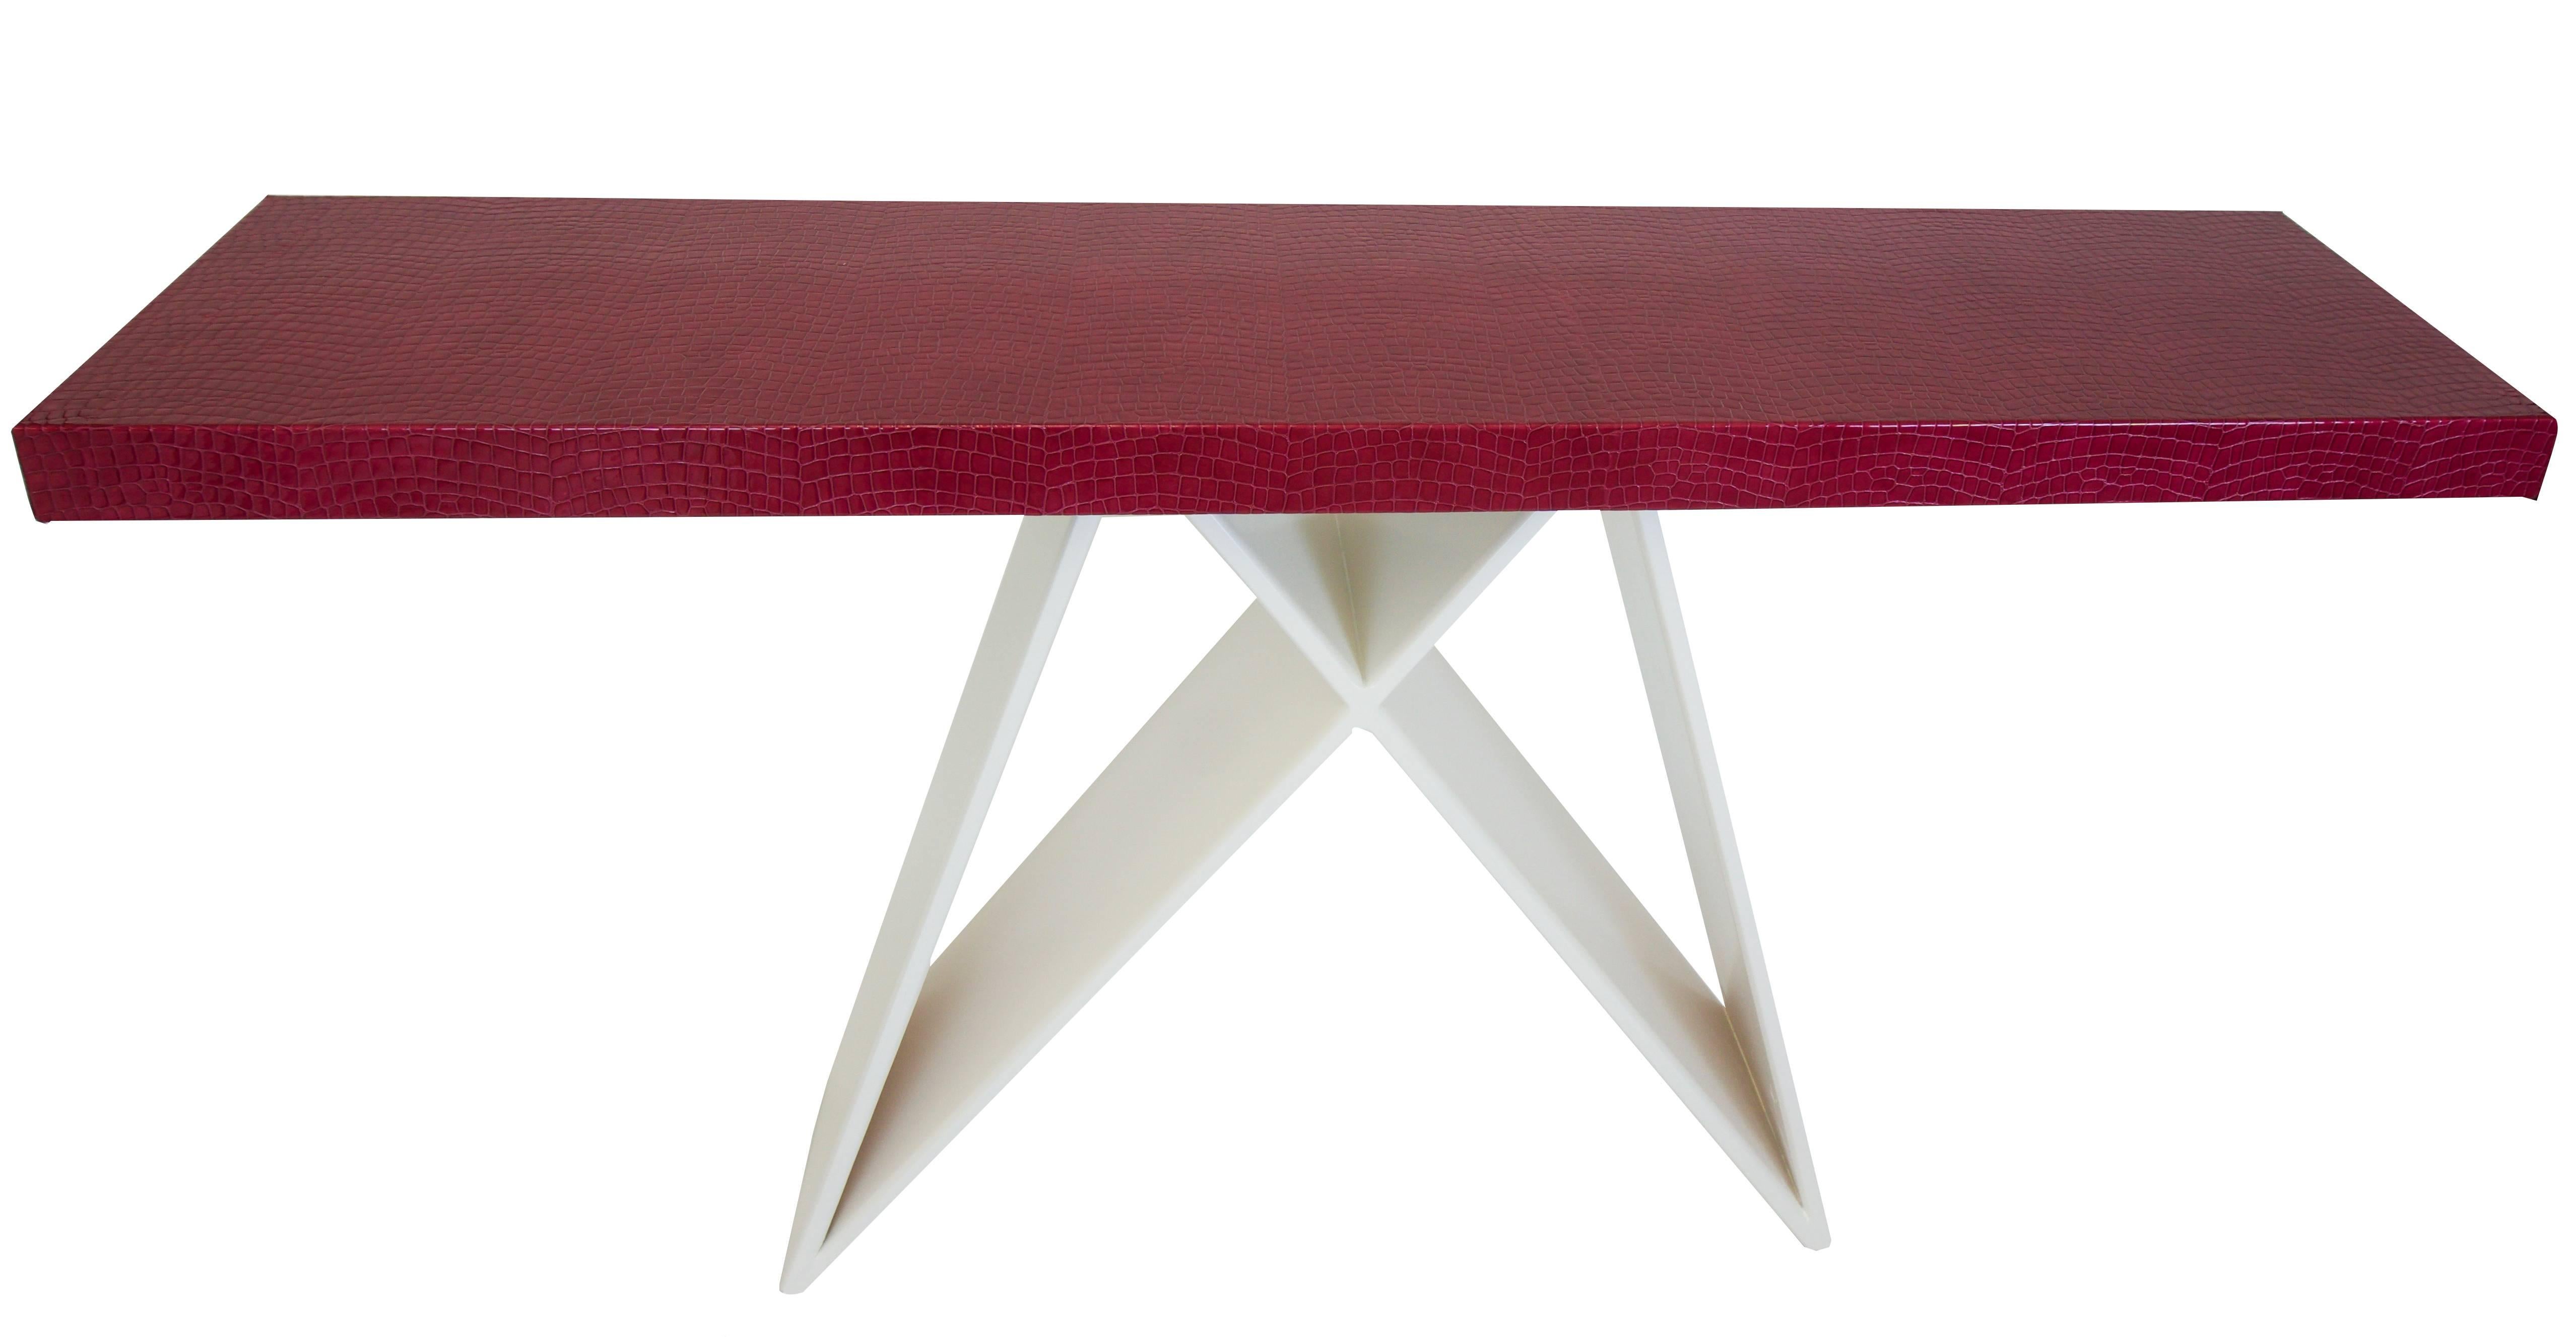 Italian raspberry leather top. Lacquered base in matte finish.

Measurements: 34